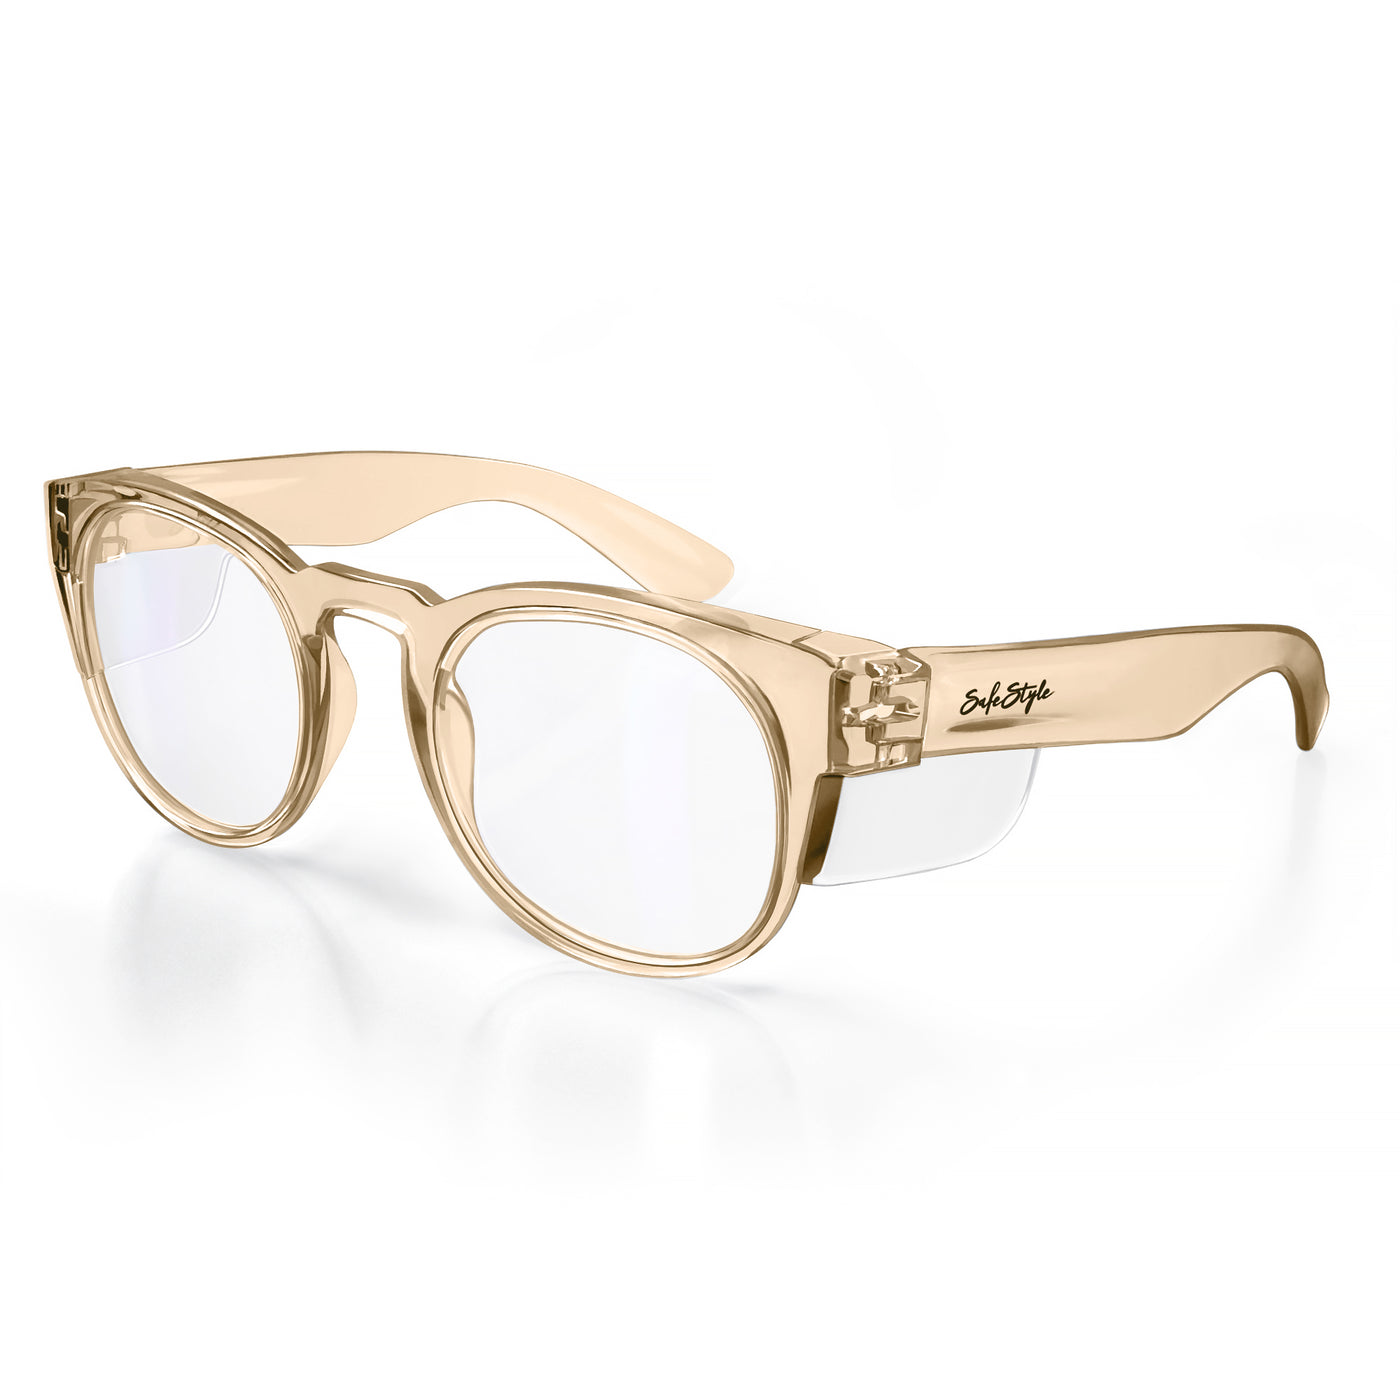 Cruisers Champagne Frame Clear Lens